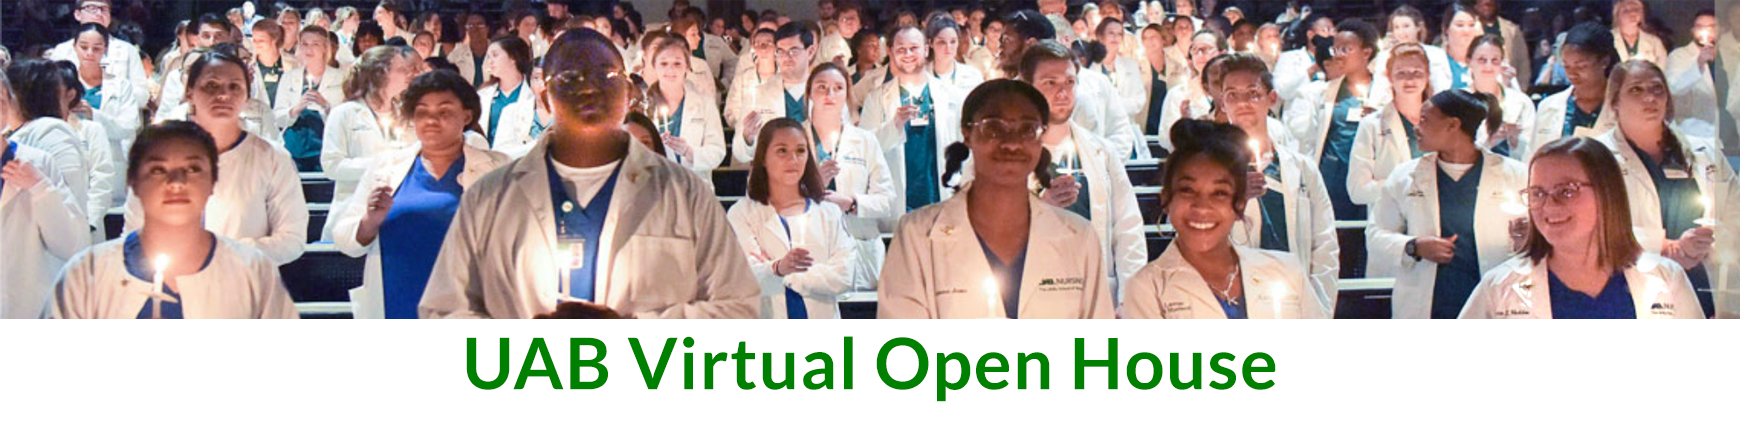 UAB Virtual Open House Page ICon